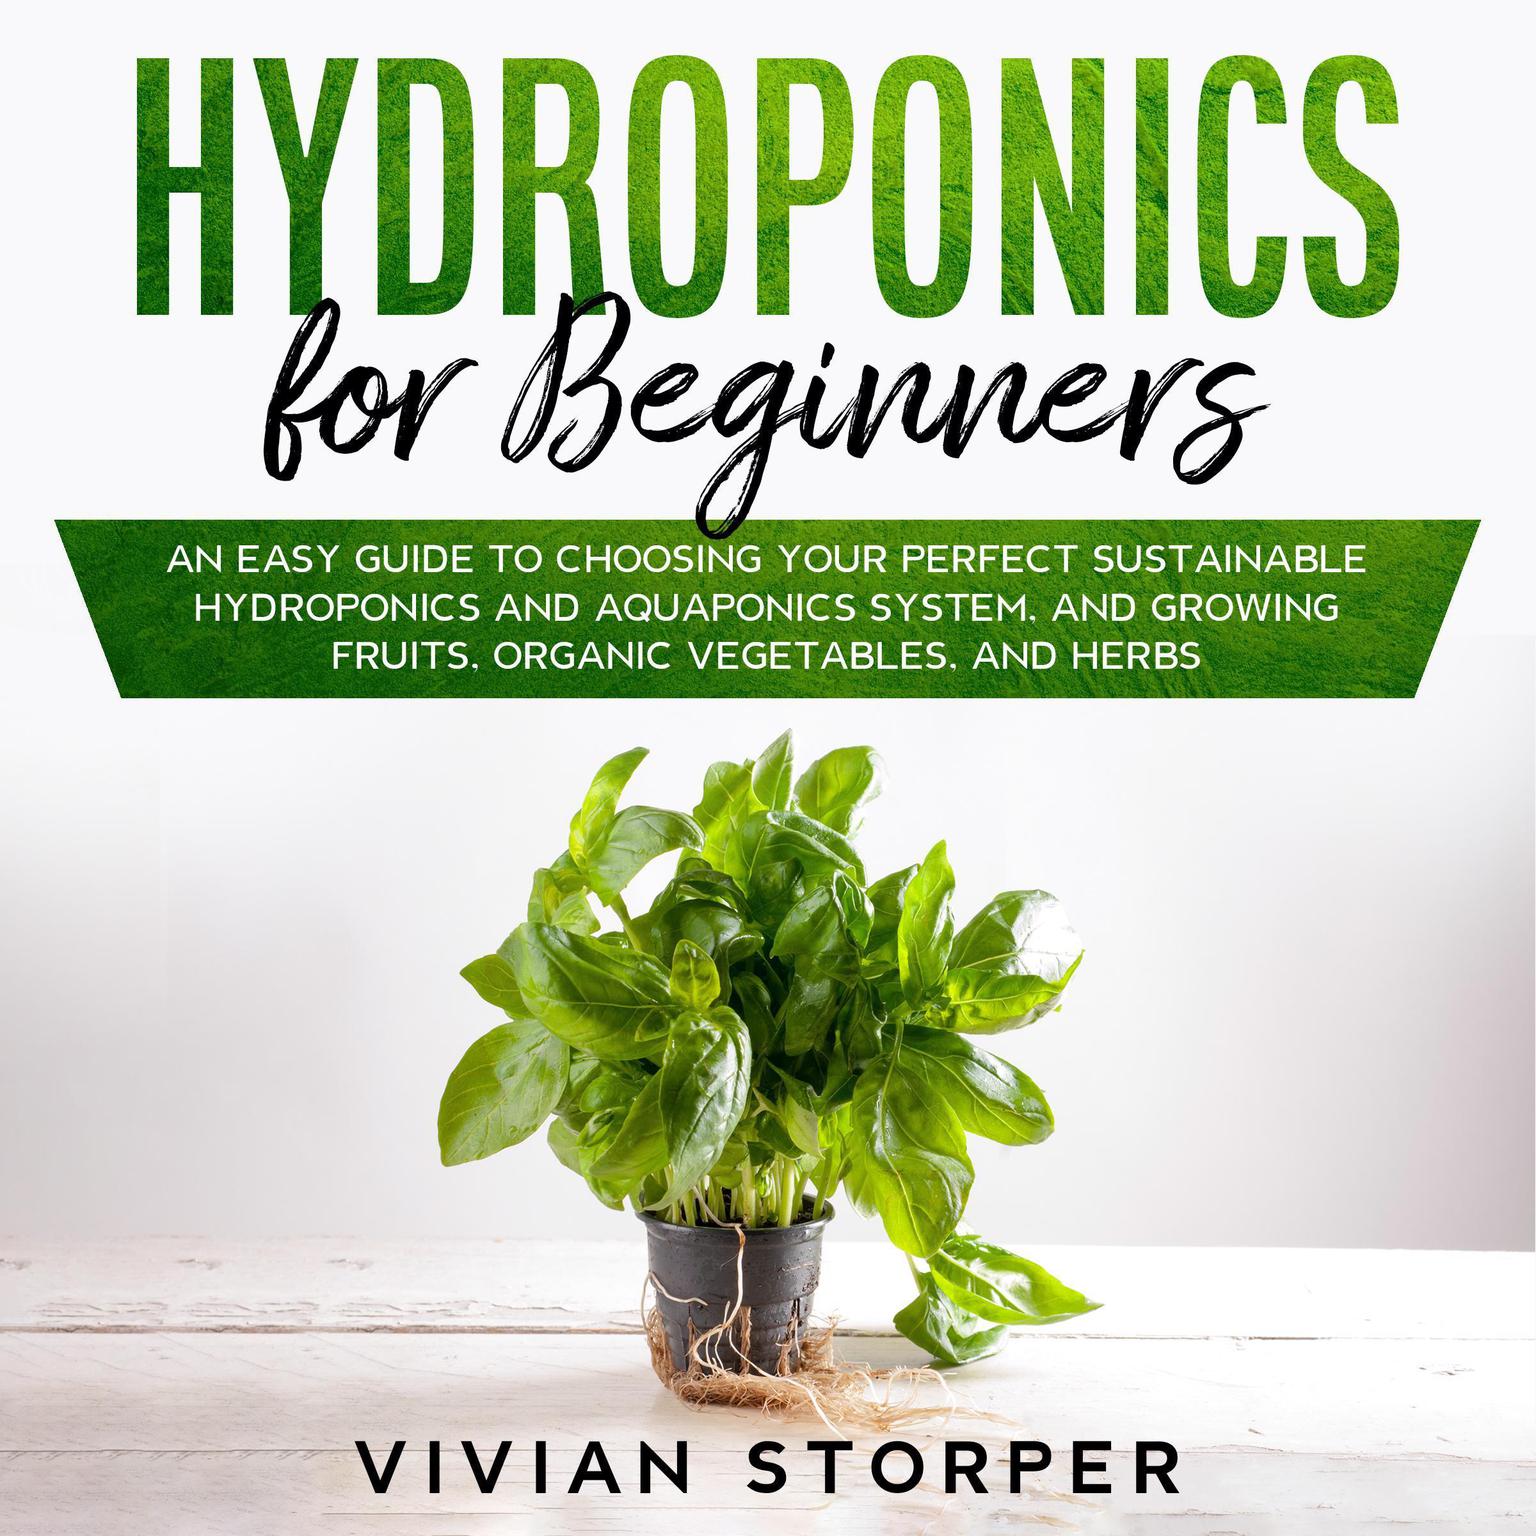 Hydroponics for Beginners: An Easy Guide to Choosing Your Perfect Sustainable Hydroponics and Aquaponics System, and Growing Fruits, Organic Vegetables, and Herbs Audiobook, by Vivian Storper